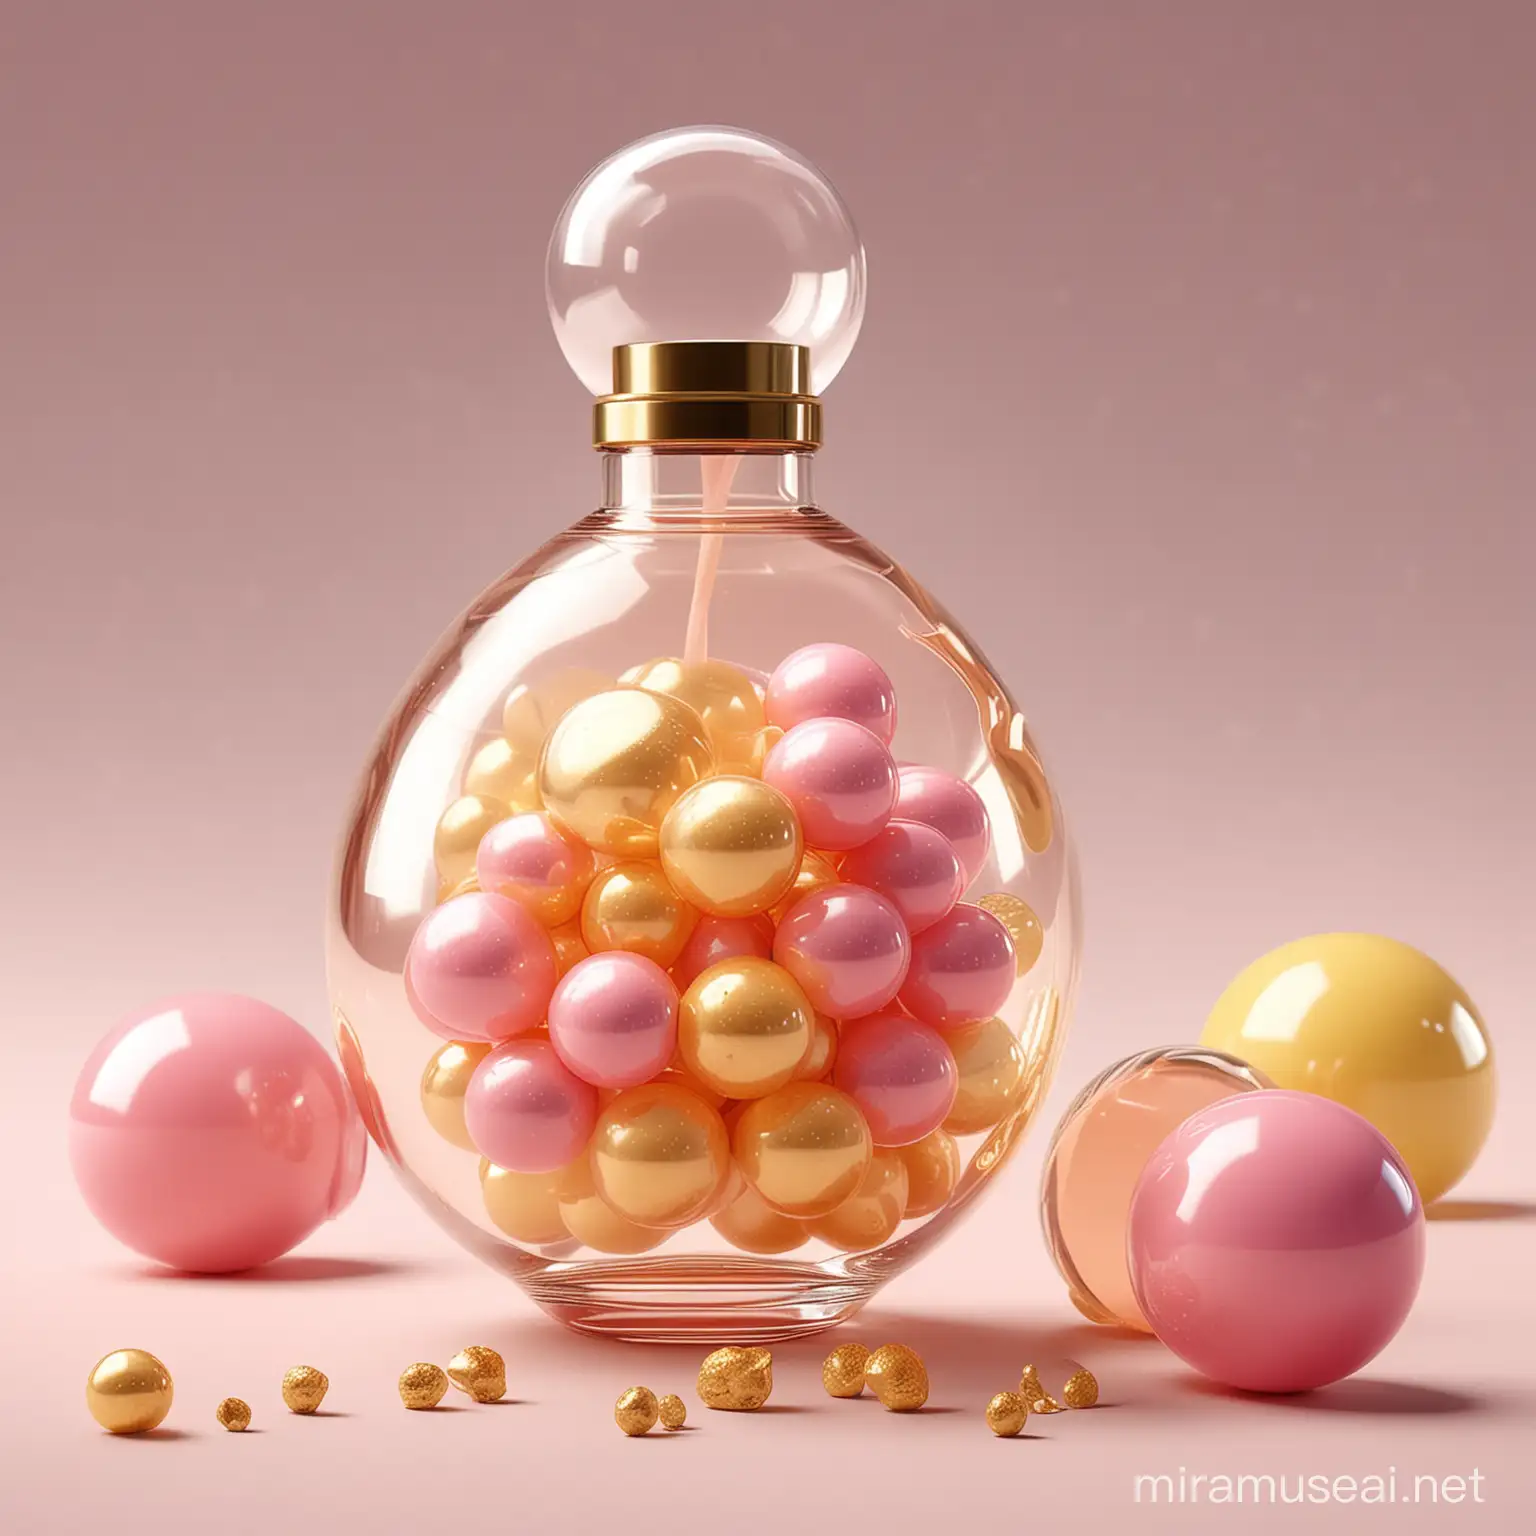 Modern Bubble Gum Inspired Fragrance Bottle Design with Gold Accents